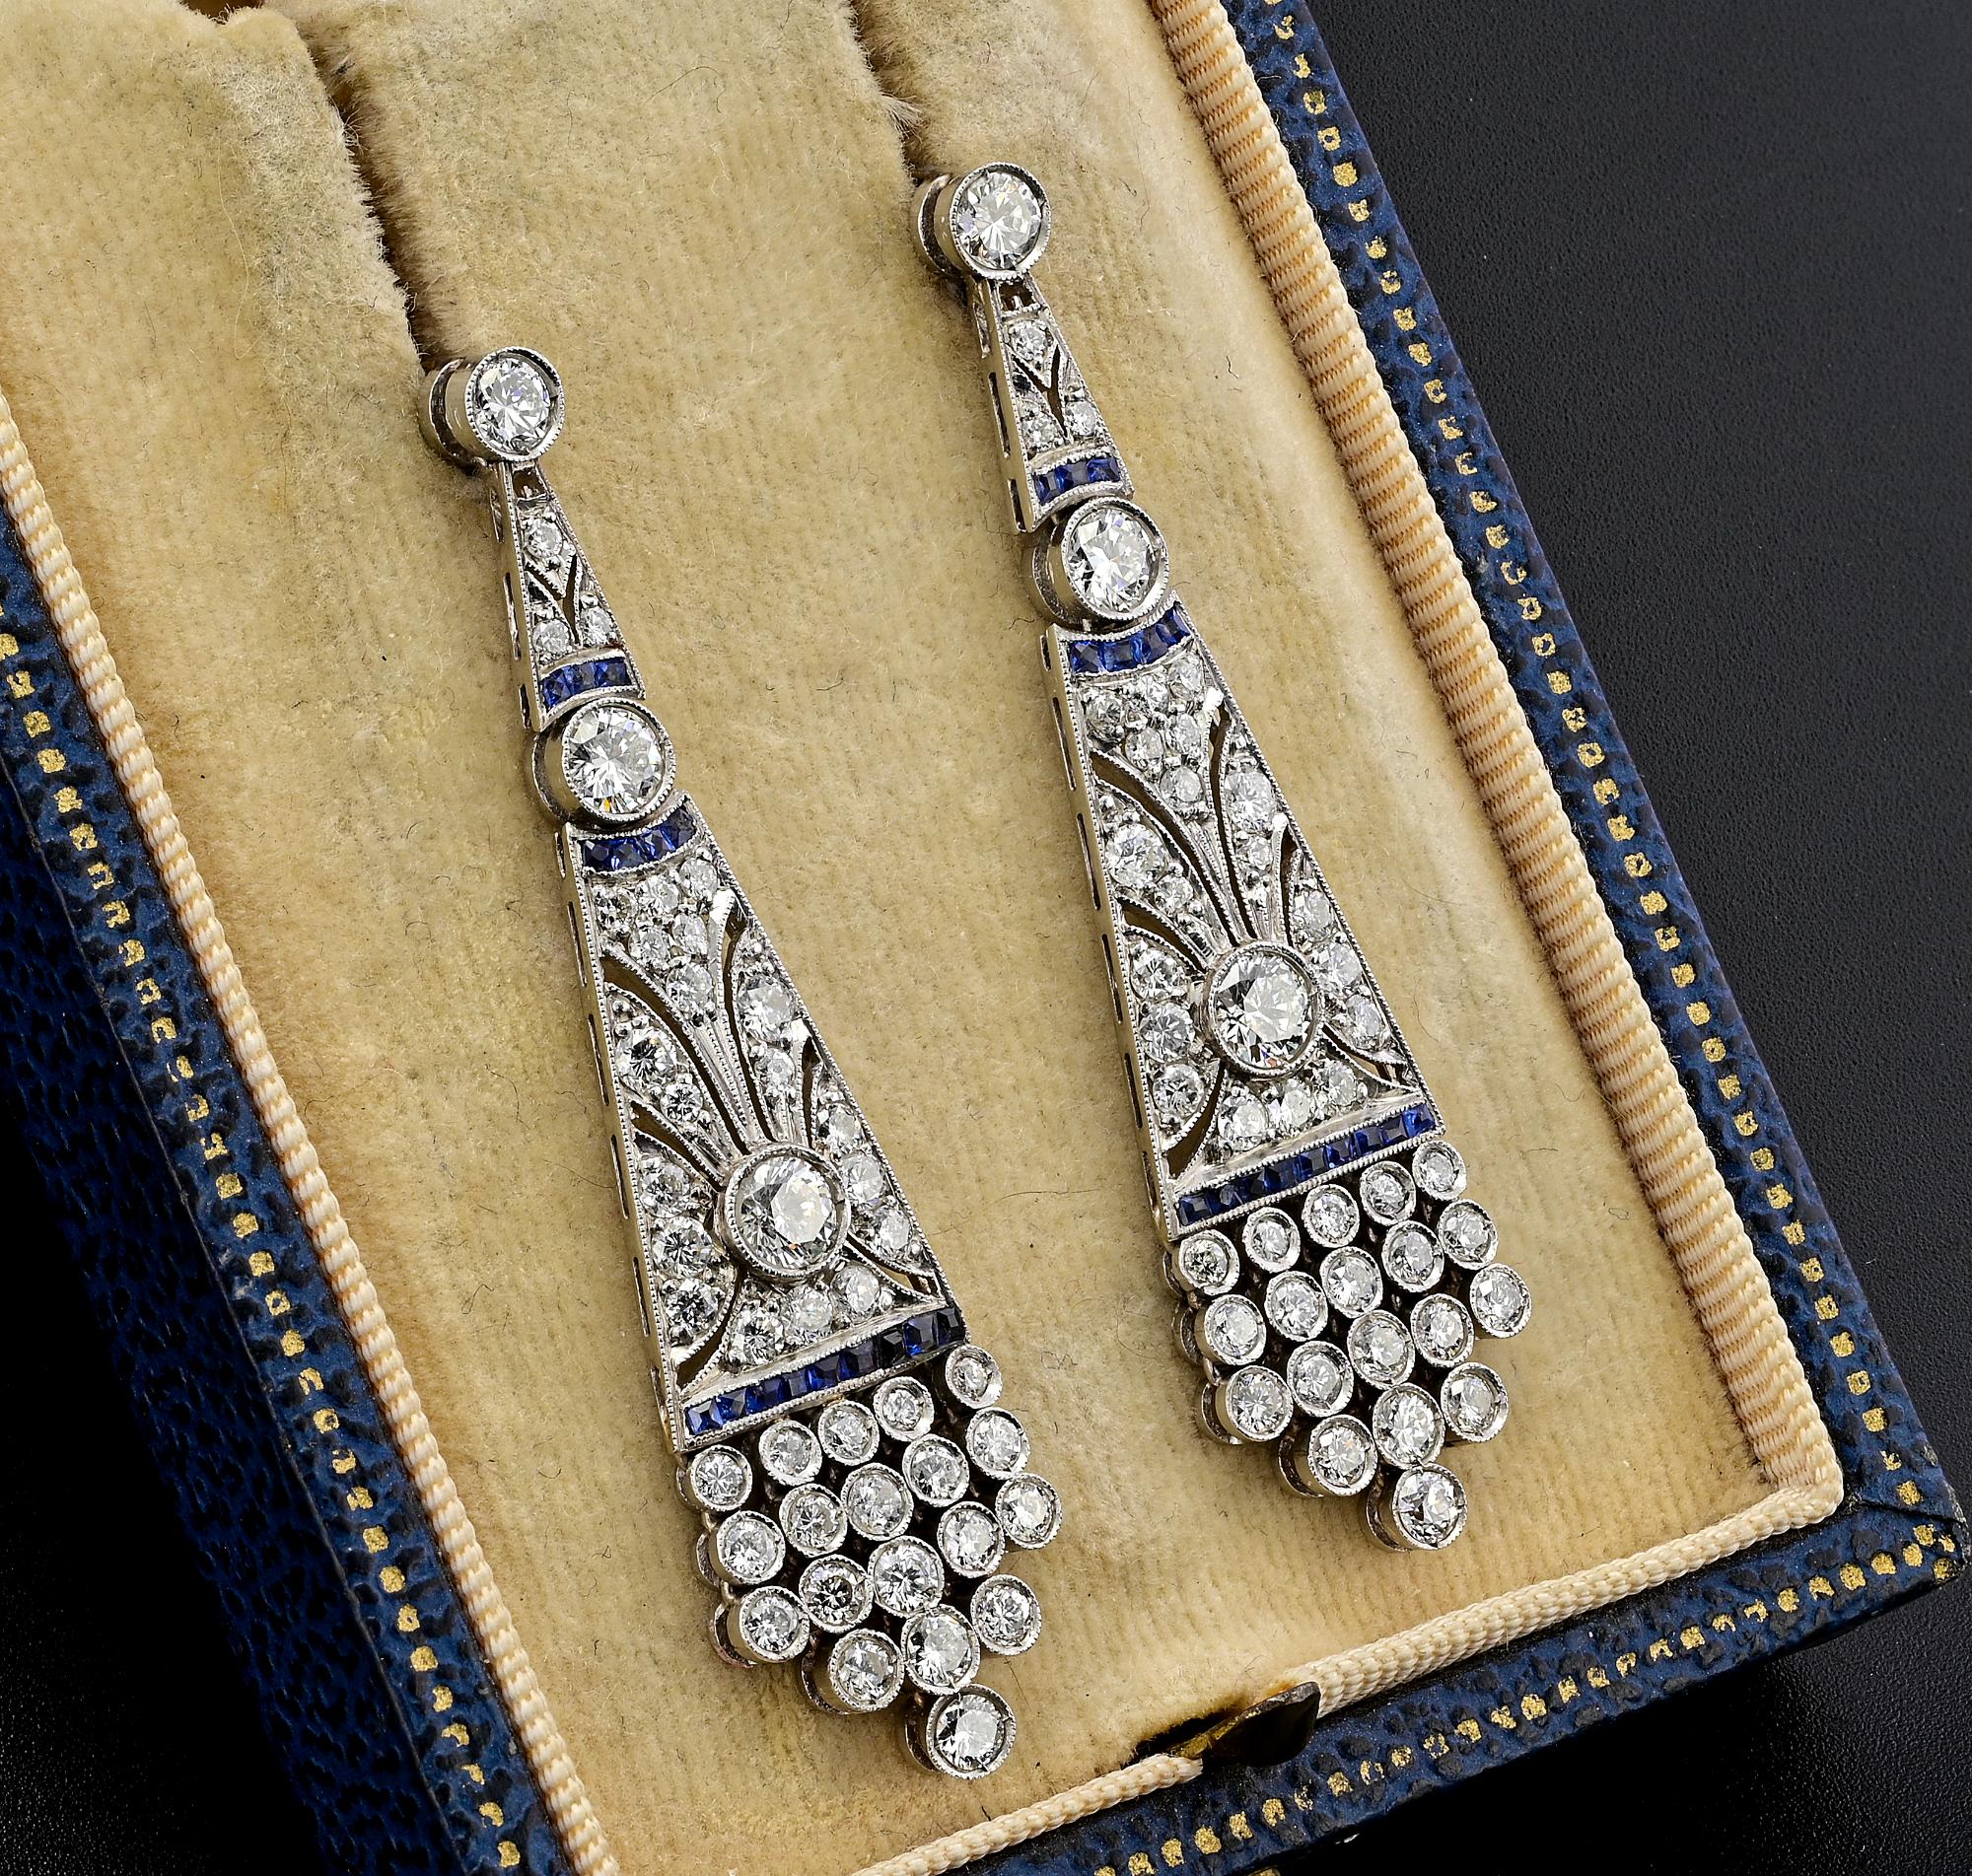 These extraordinary Art Deco earrings are 1920 circa
One of a kind design distinctive of the era hand crafted of solid Platinum
Set with a selection of bright white and full of sparkle old European cut Diamonds totaling approx. 4.0 carats - assessed